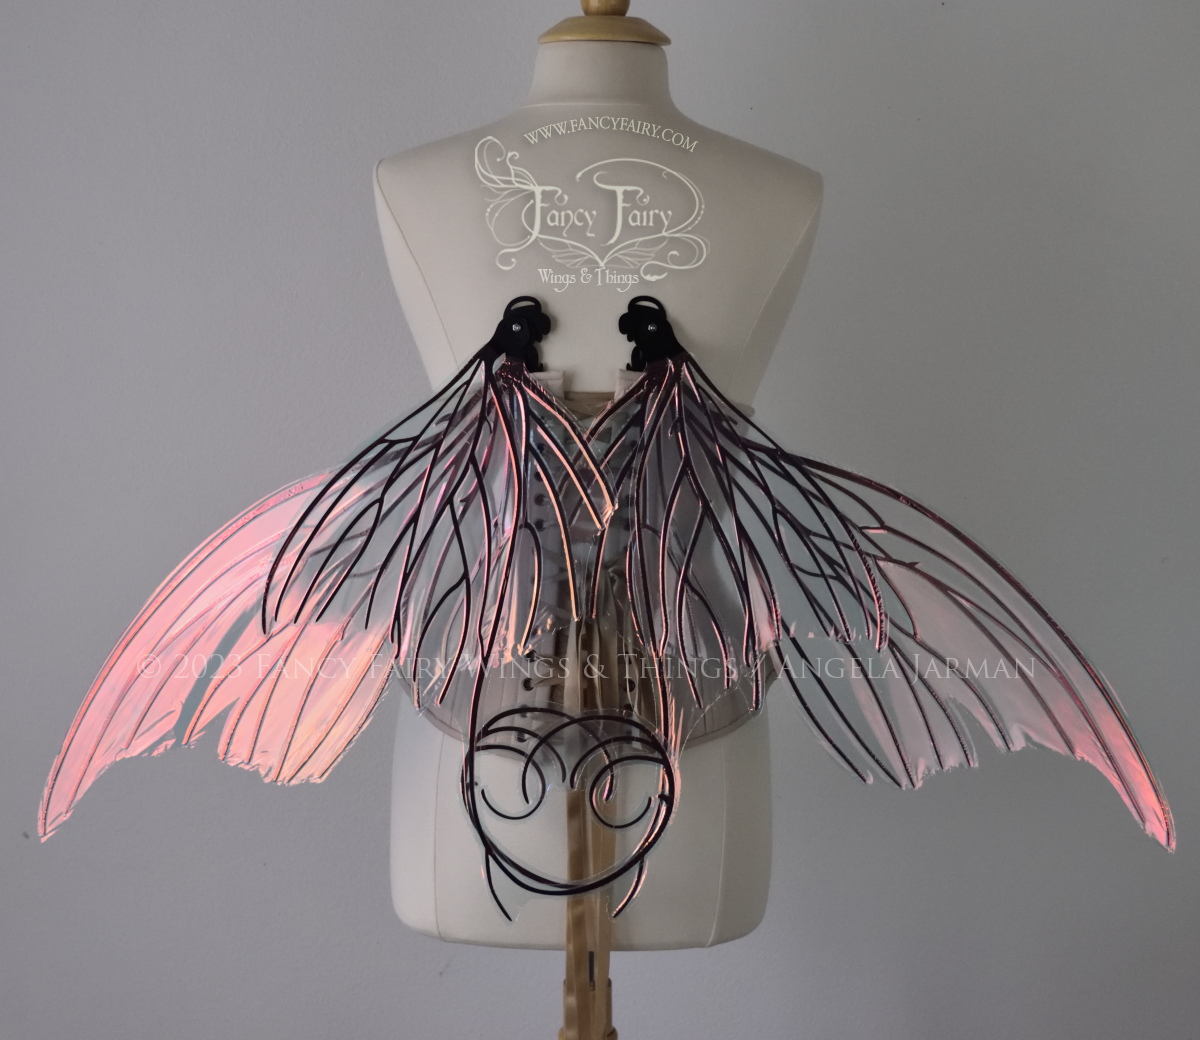 Aphrodite Convertible Iridescent Fairy Wings in Blush with Black Veins, Ready to Ship